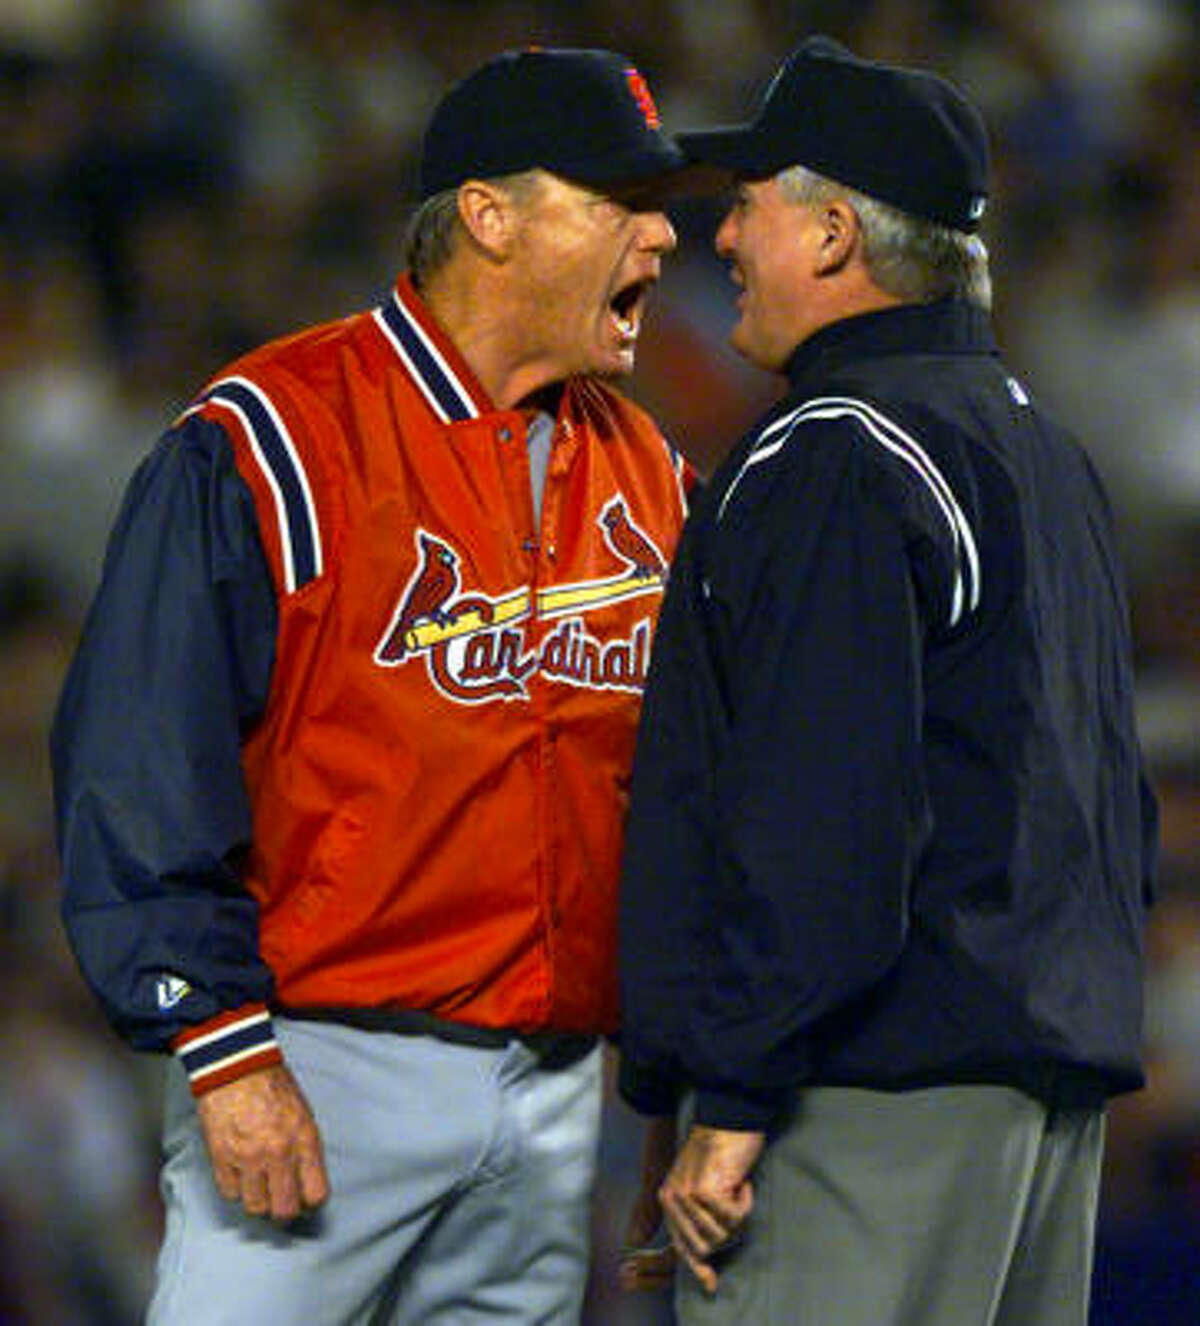 Cardinals pitching coach Dave Duncan, considered the best in baseball, may not be one of the interested candidates.